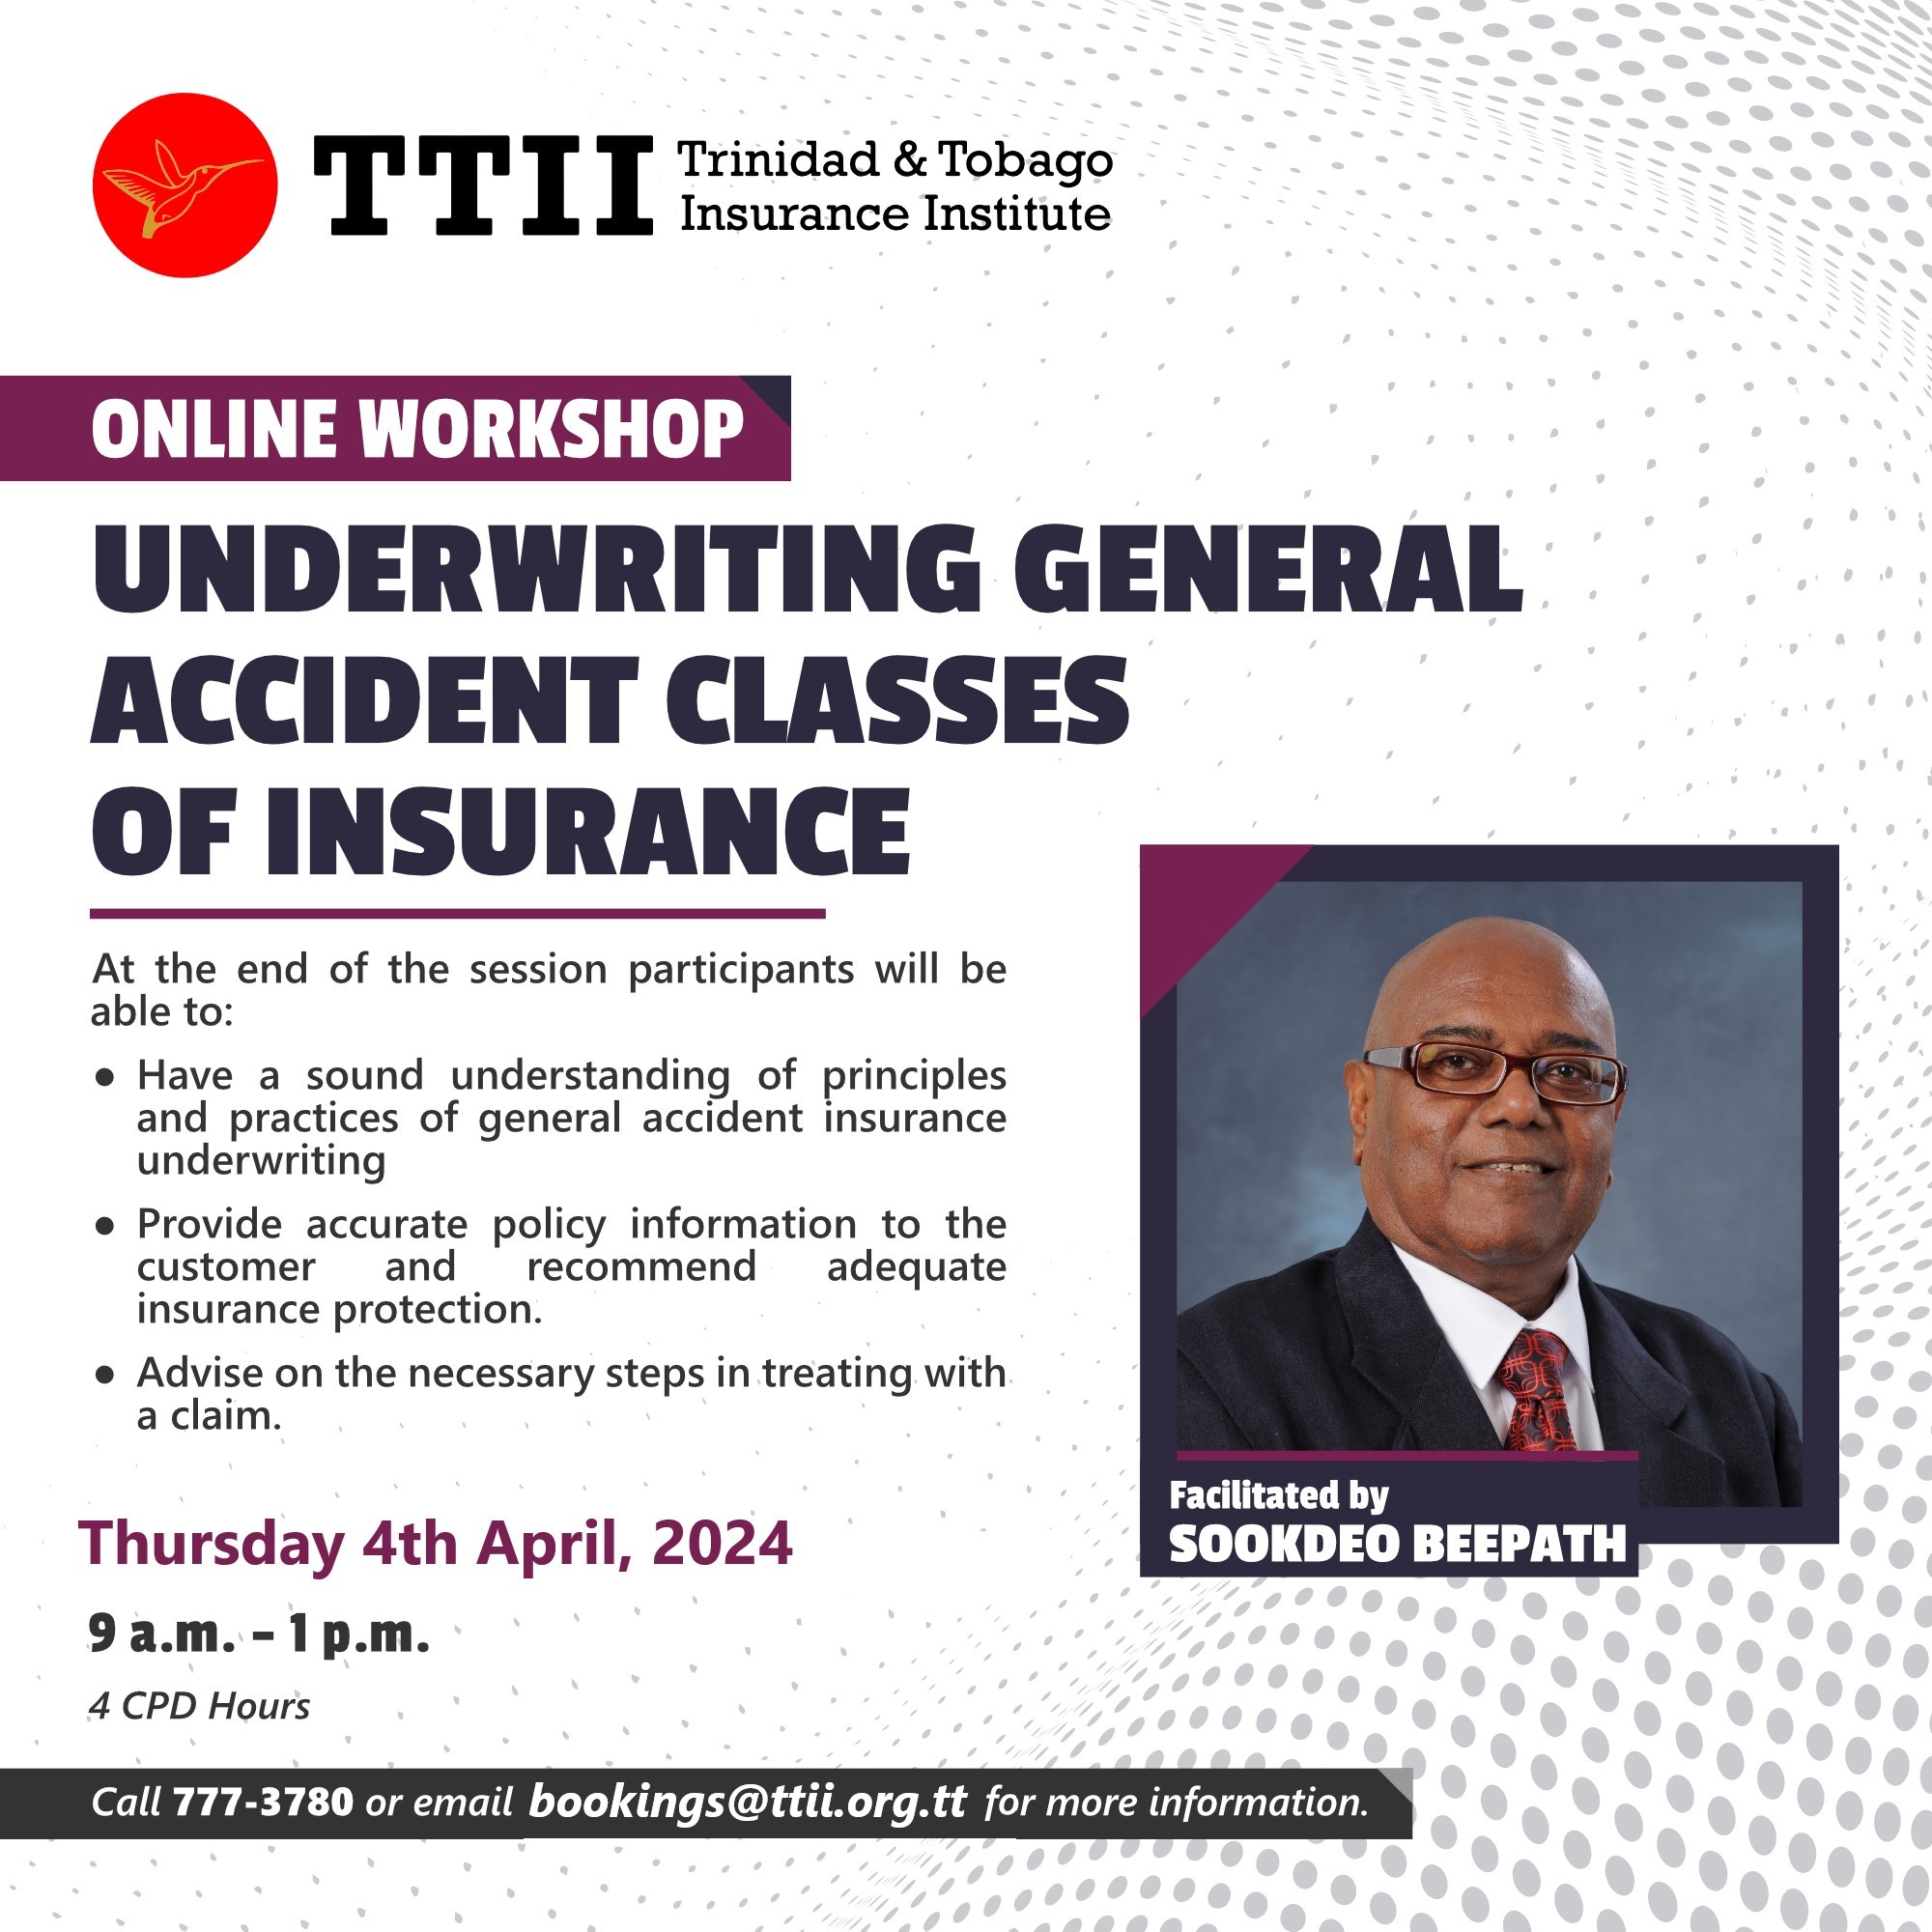 Underwriting General Accident Classes of Insurance